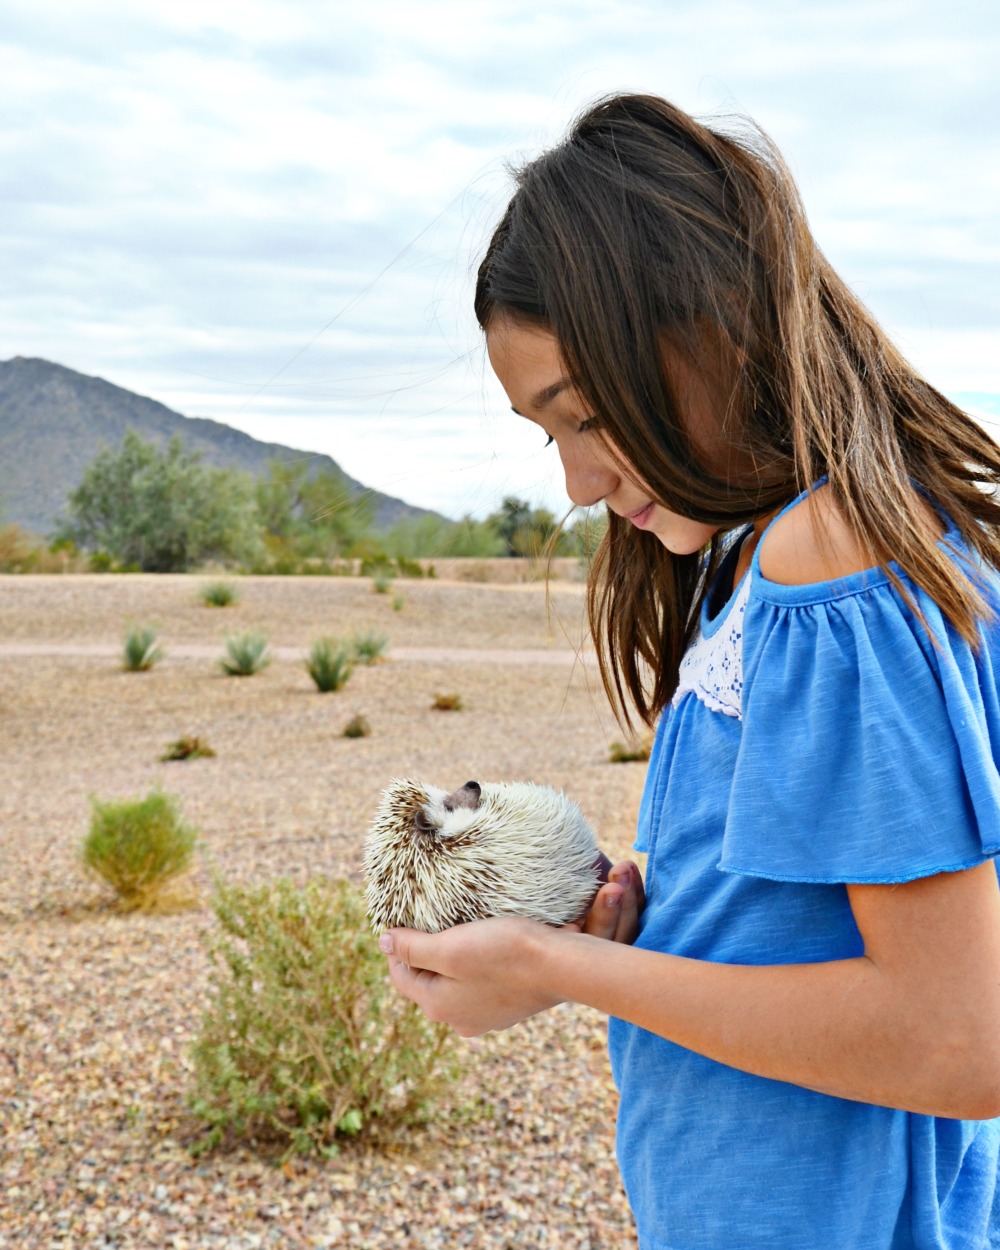 Our daughter has an incredible bond with her pet hedgehog and we think hedgehogs make good pets for kids.